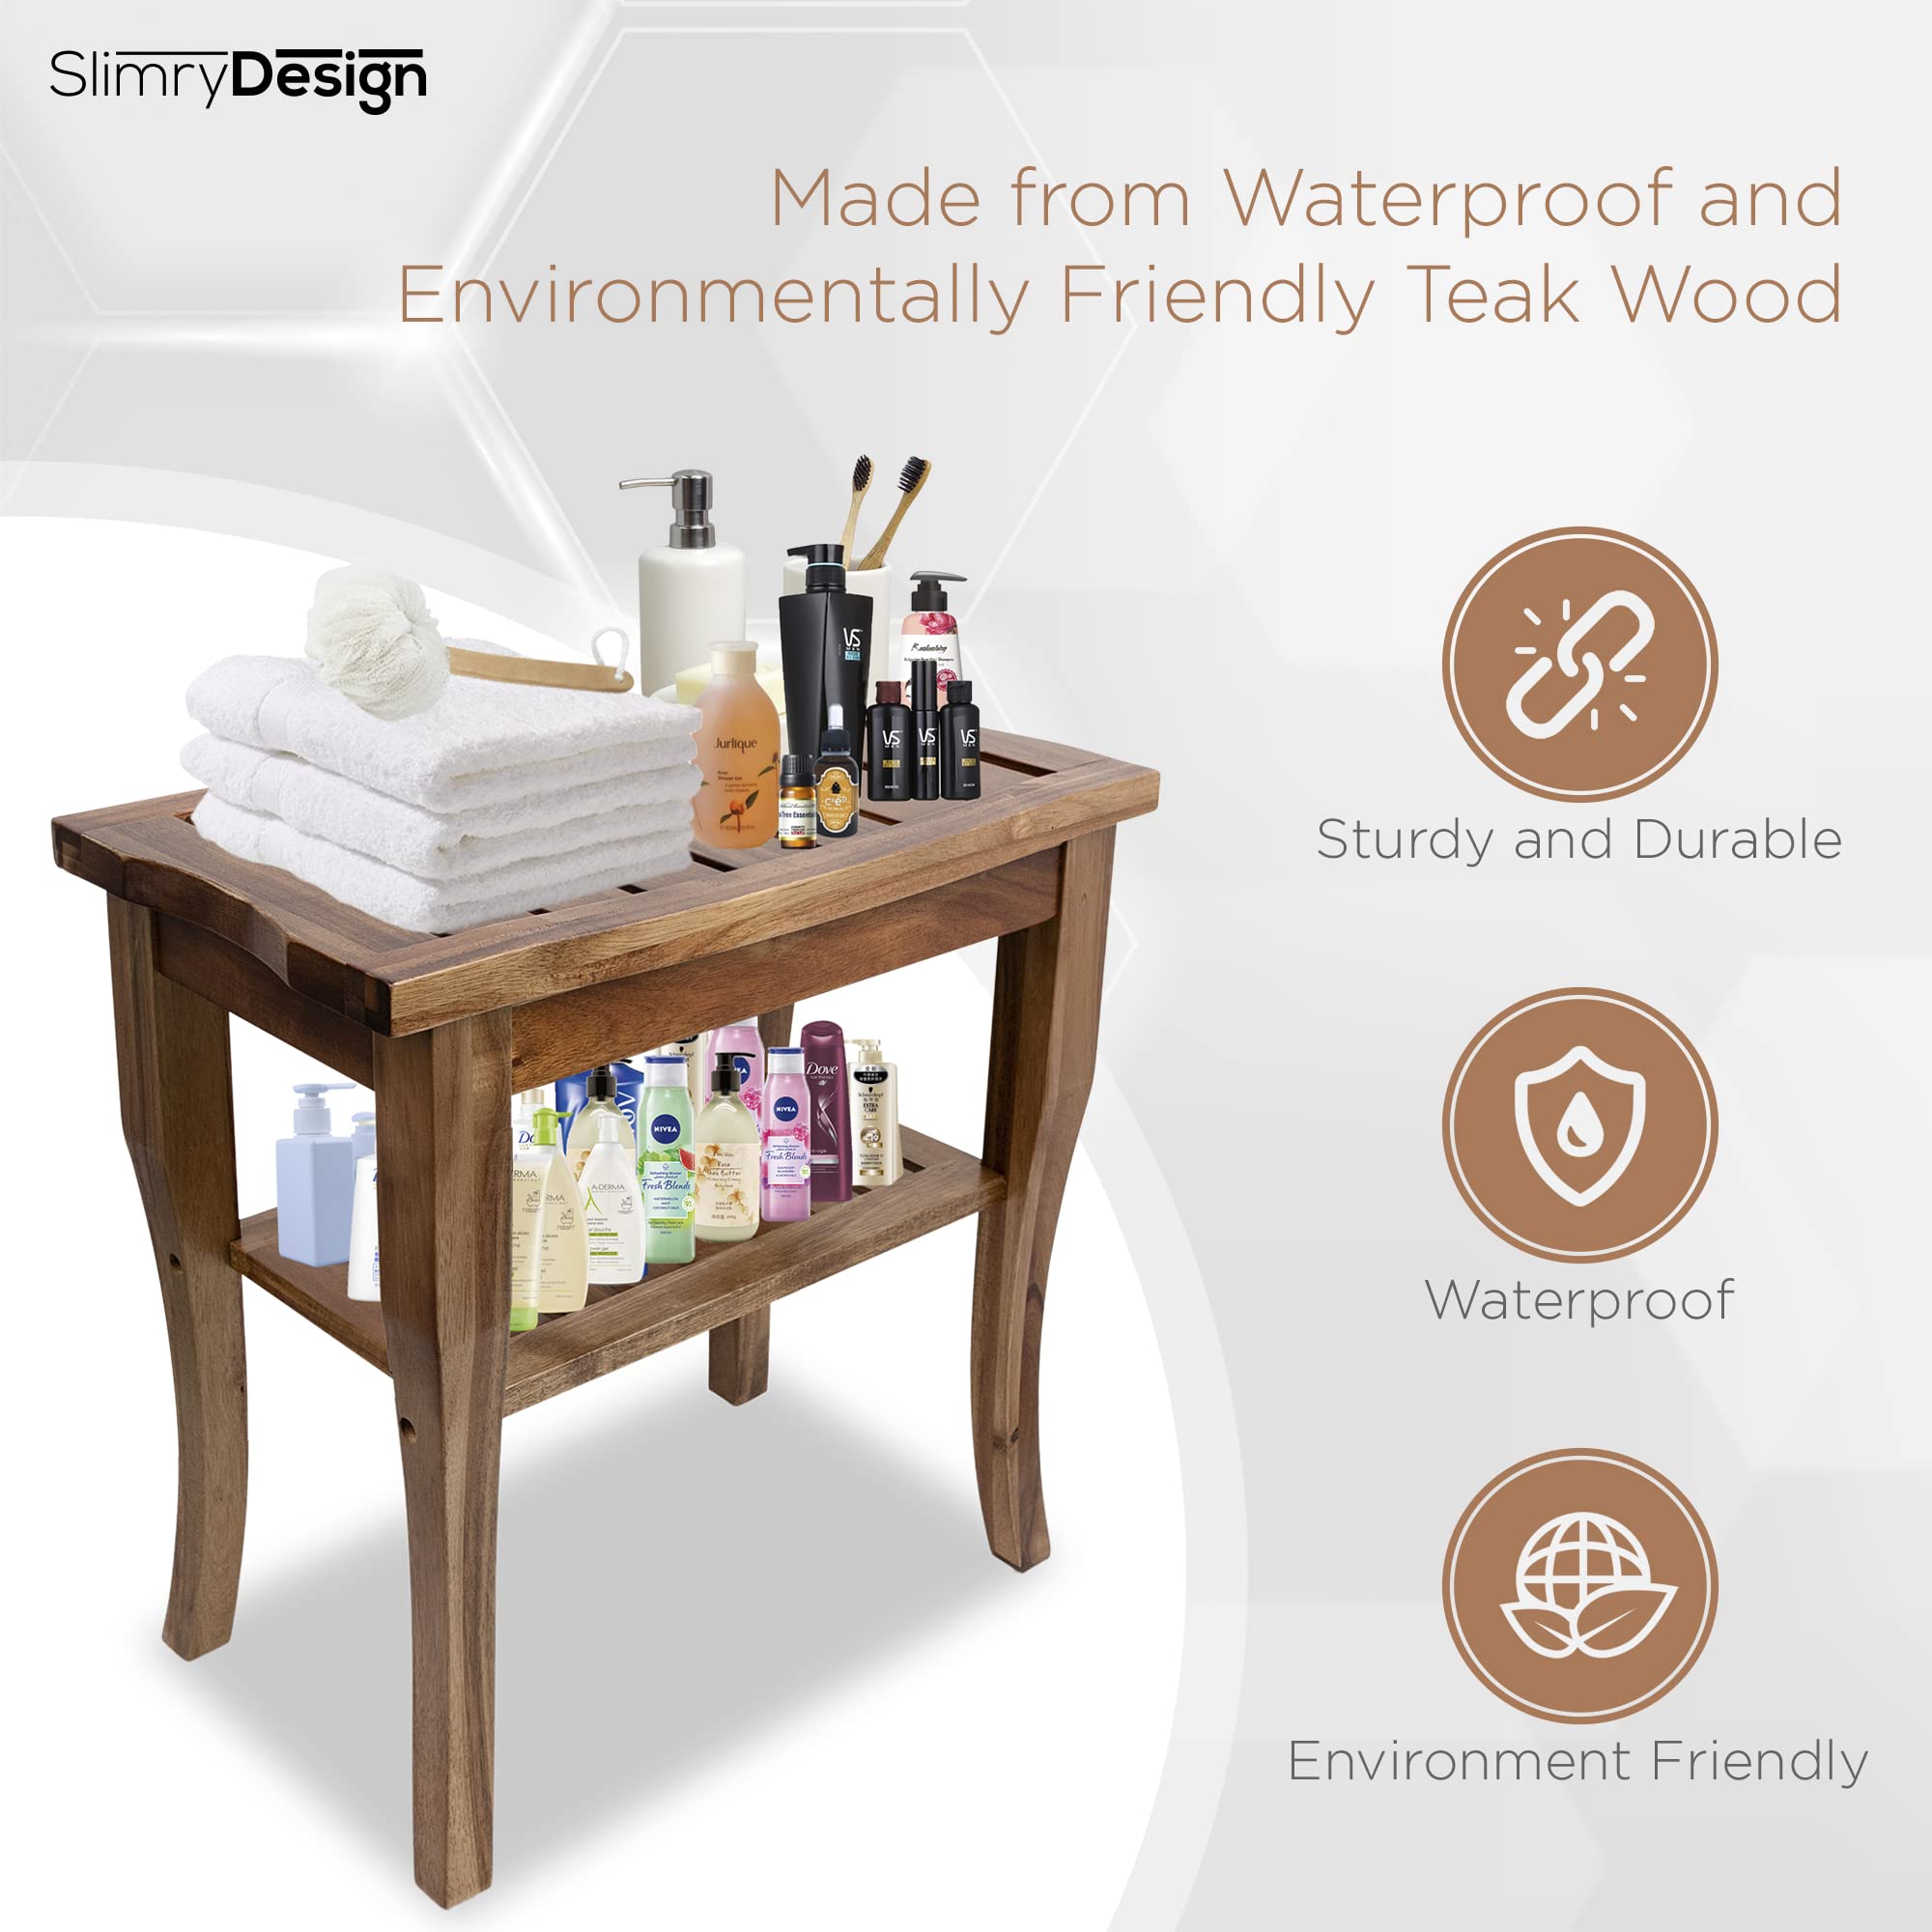 Slimry Design Teak Shower Bench - Solid and Water -Resistant Teak Bench with Storage Shelf Easy to Use Bath Stool with Non-Slip Pads -Assembly Required (Small)  - Very Good